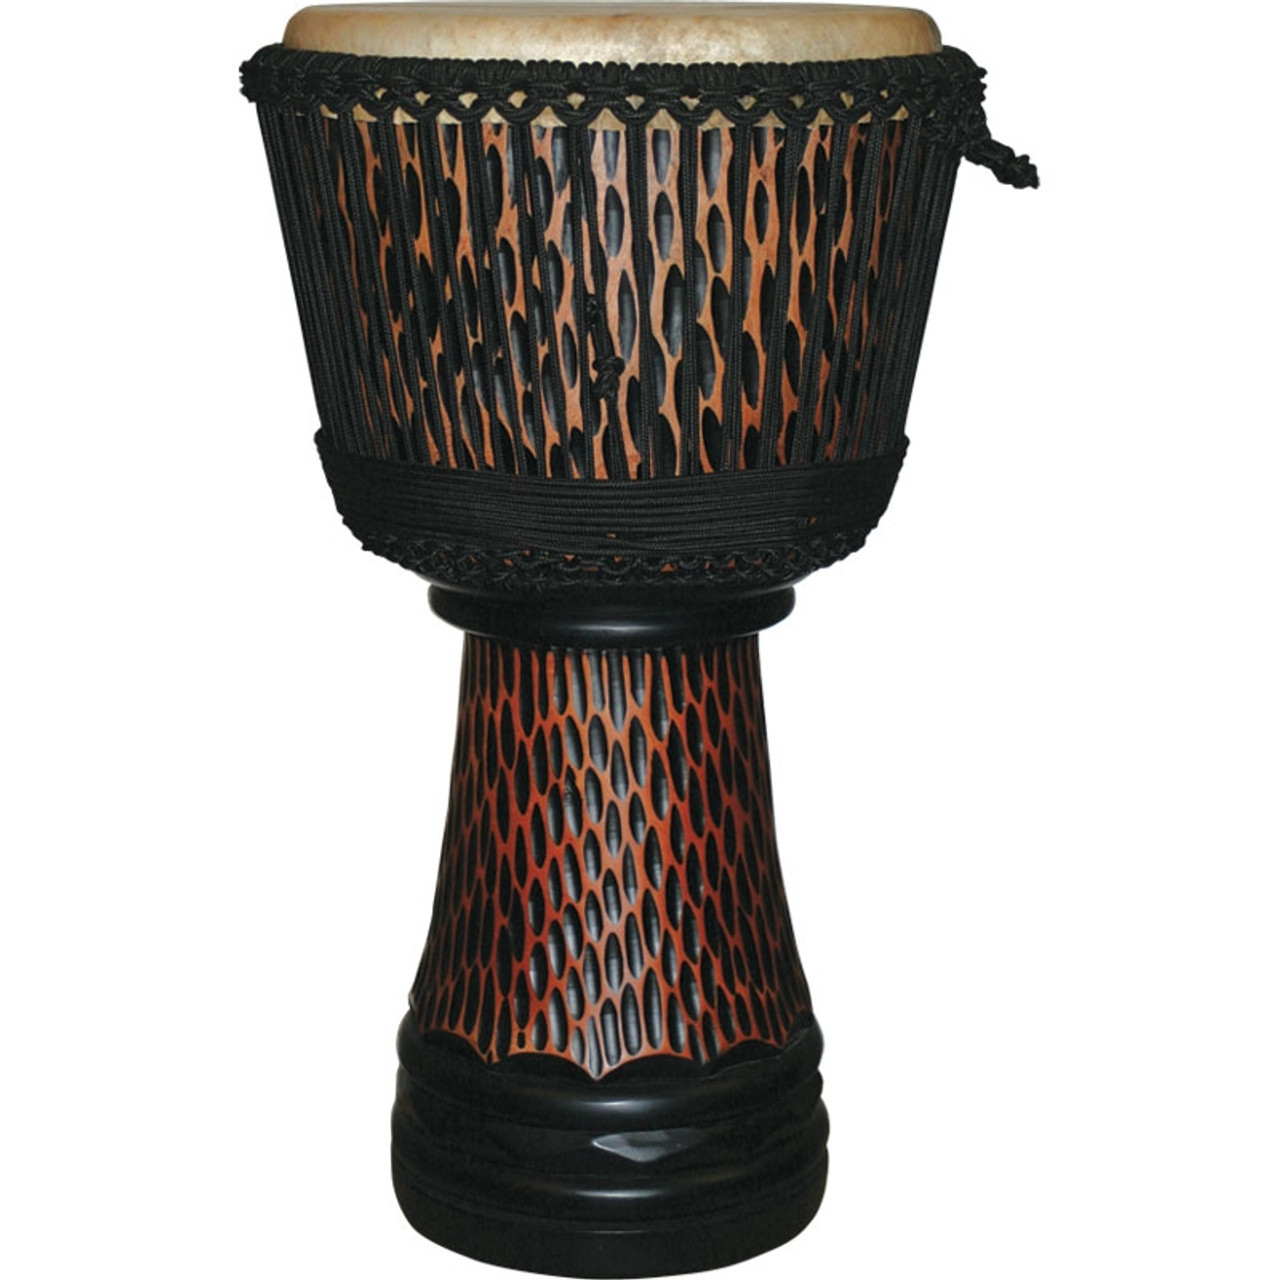 2023 African Individual Championships - The Chess Drum